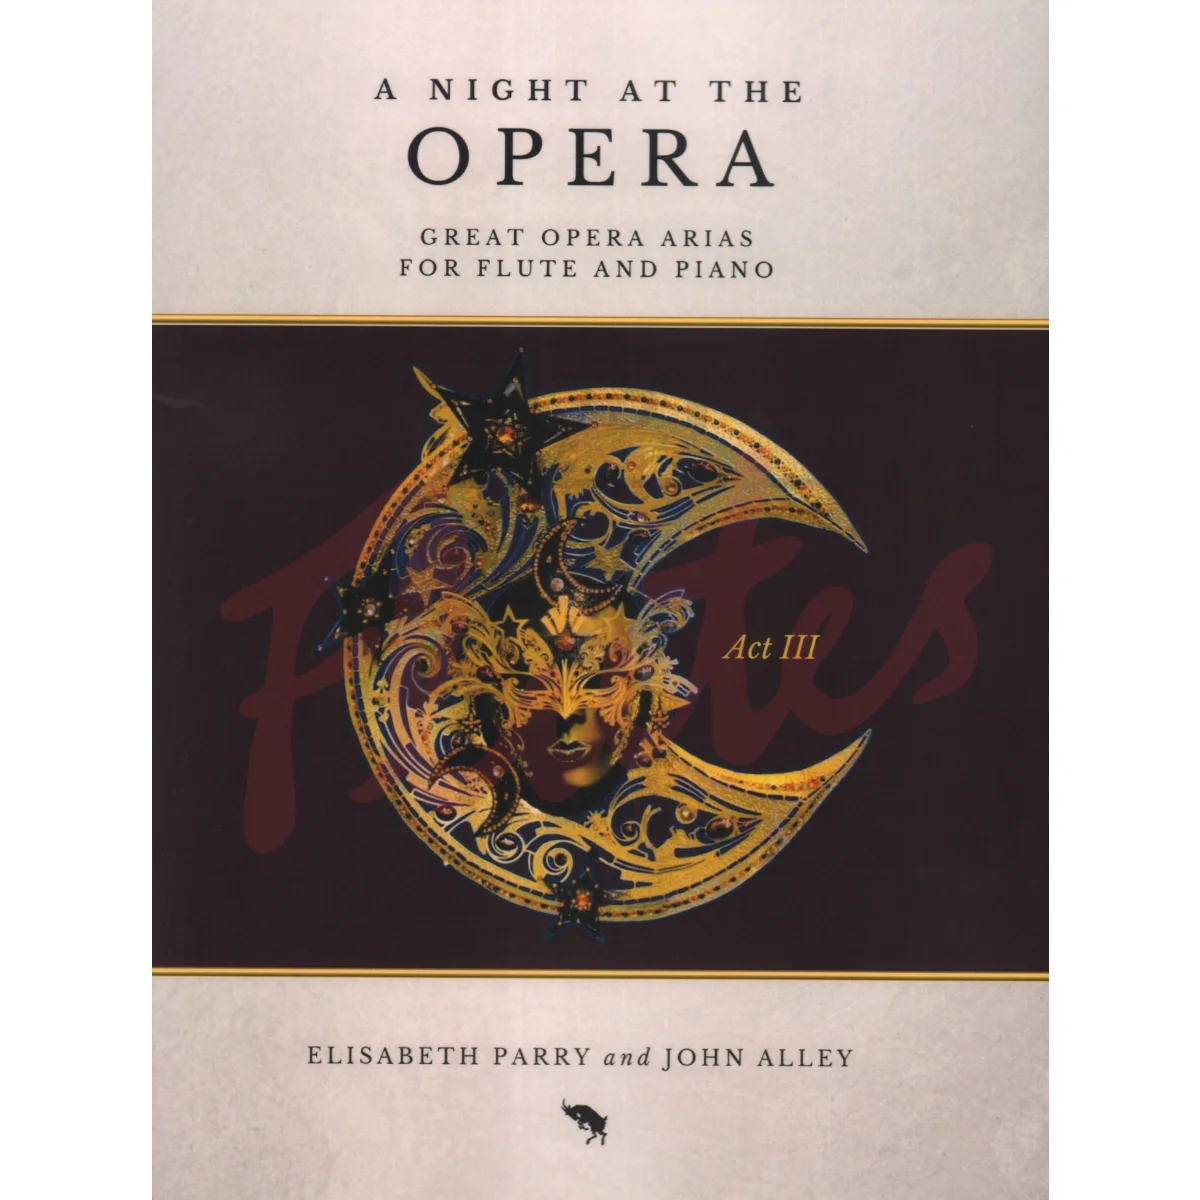 A Night at the Opera for Flute and Piano, Act III